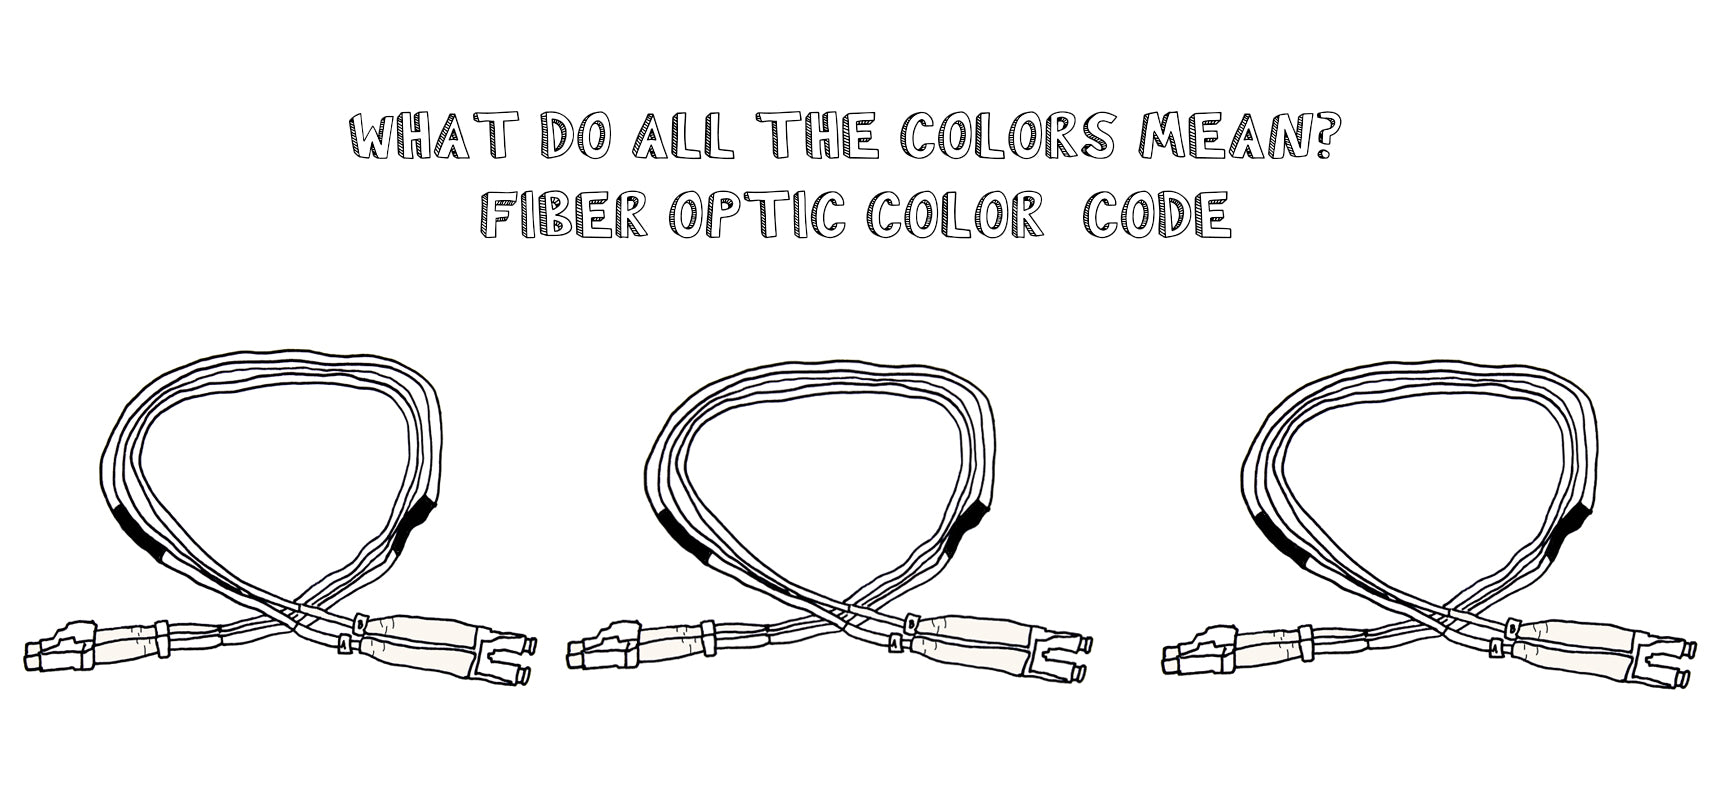 What Do All The Colors Mean? Fiber Optic Color Code Explained